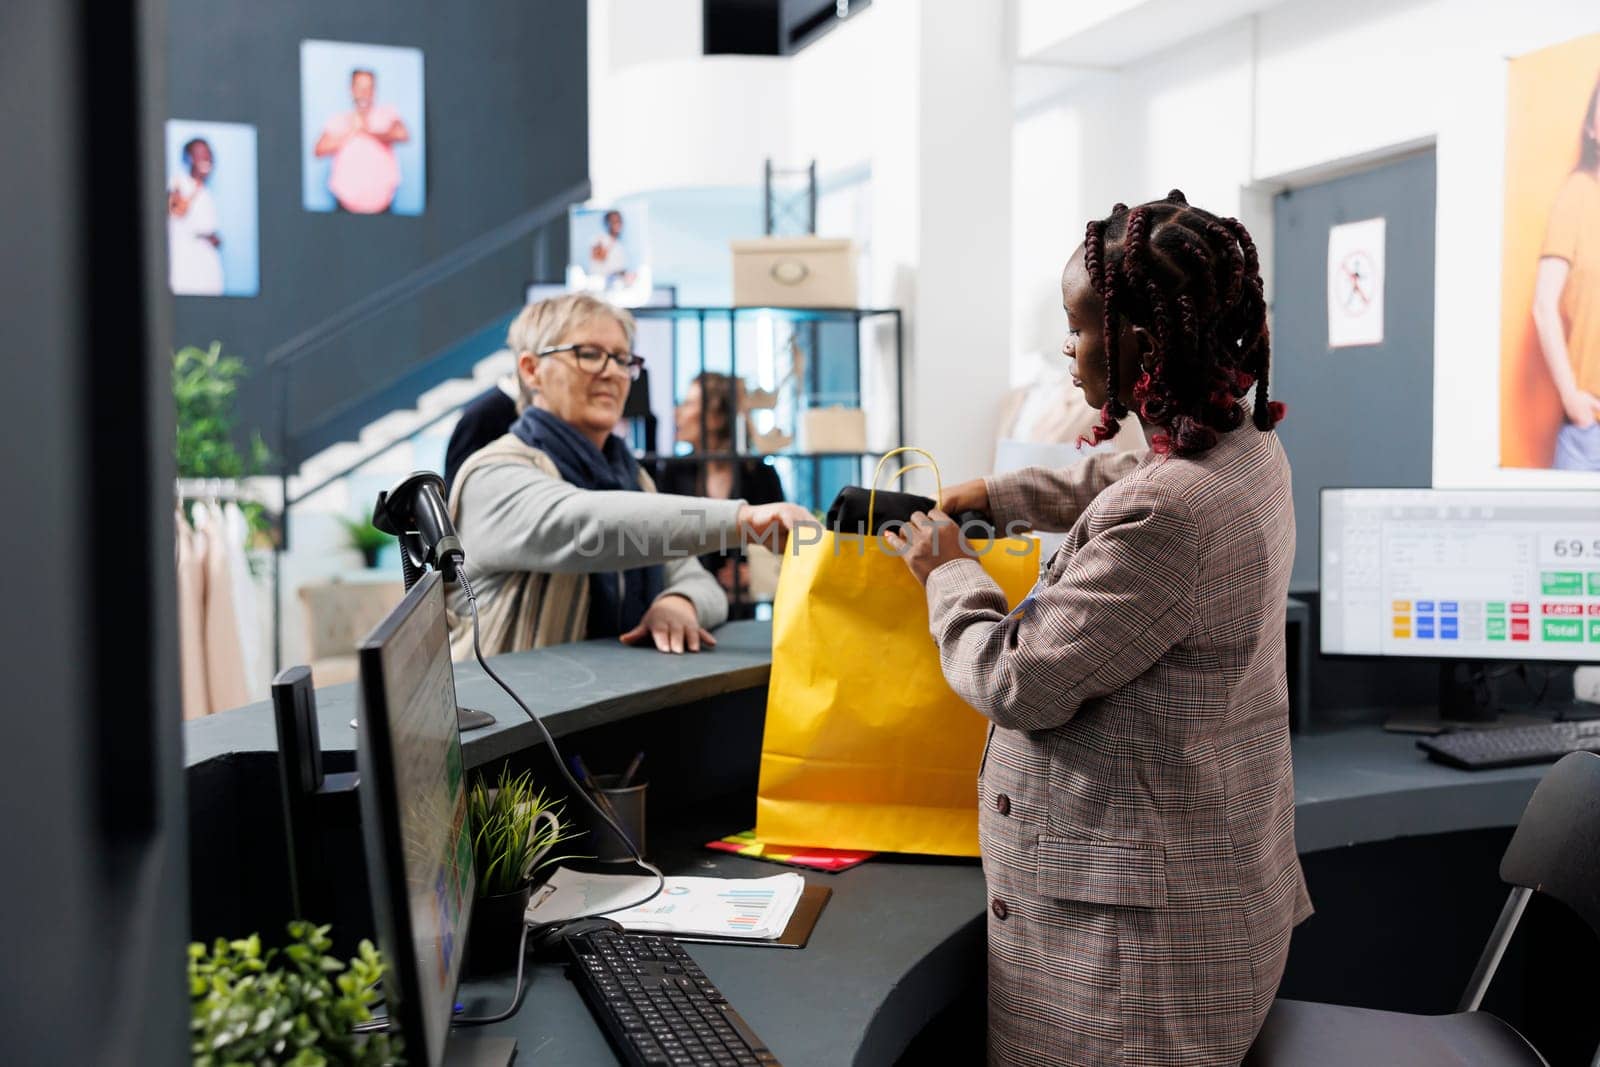 African american showroom worker preparing purchase for elderly client in clothing store. Shopaholic woman buying fashionable casual wear, making electronic payment at pos terminal.